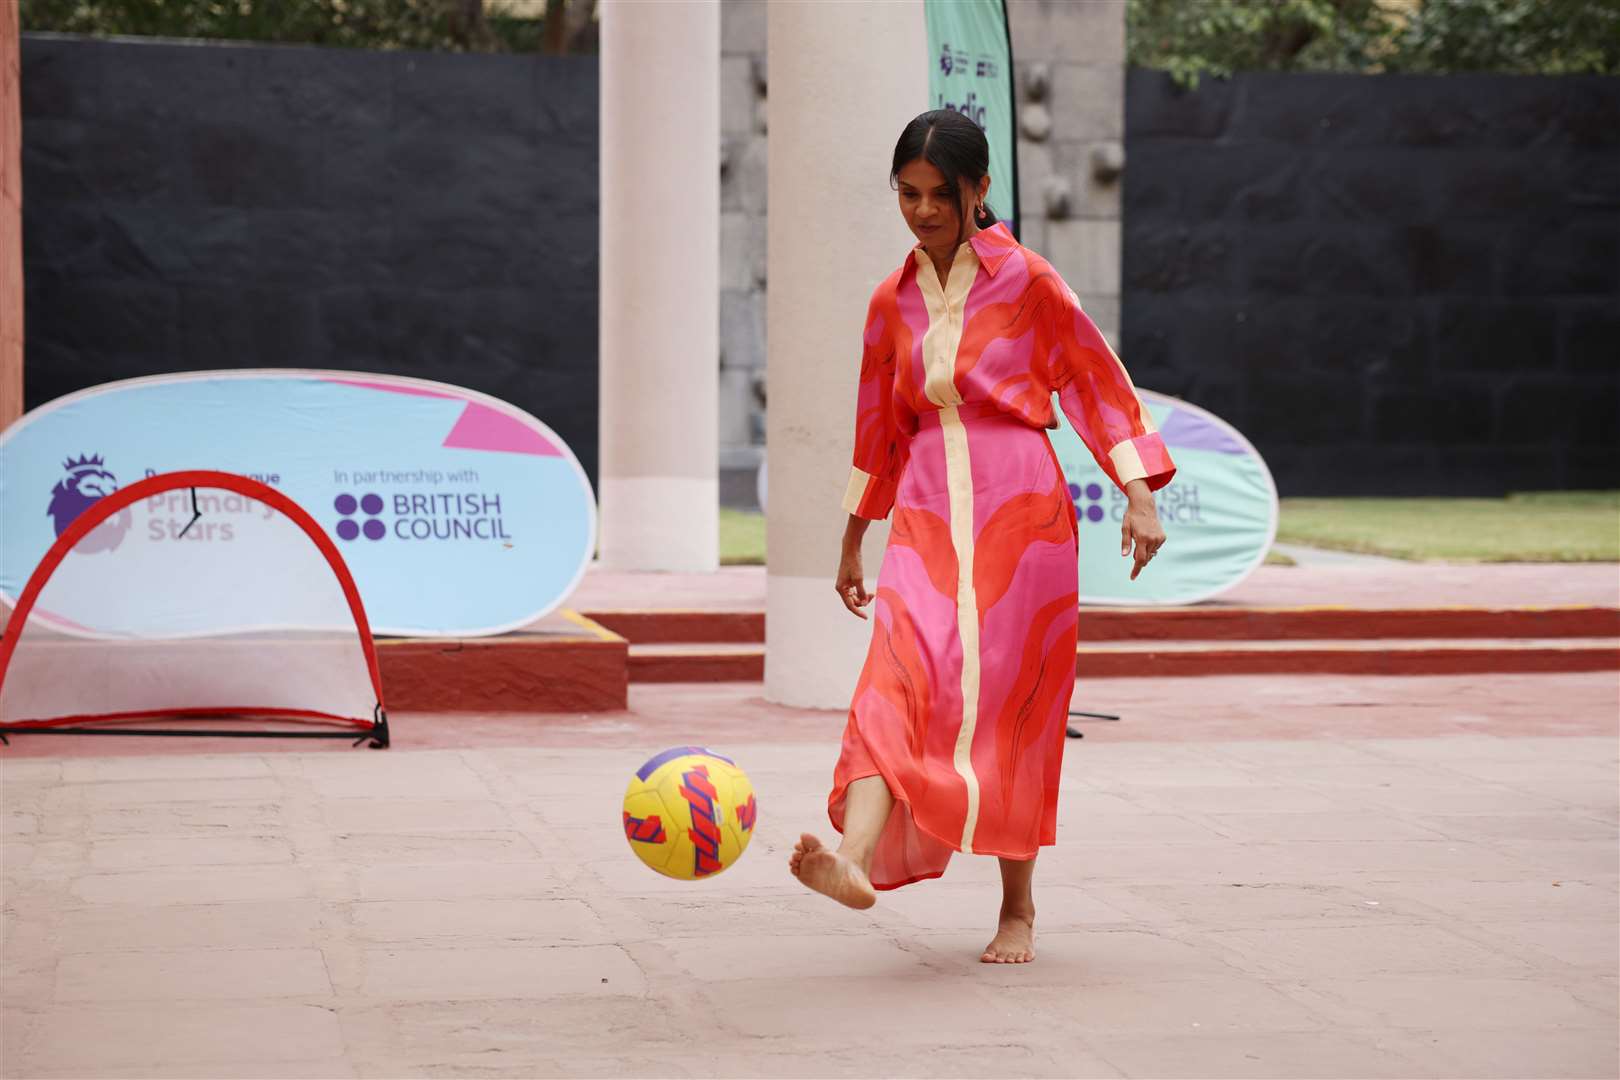 Prime Minister Rishi Sunak’s wife Akshata Murty plays football with local schoolchildren at the British Council (Dan Kitwood/PA)